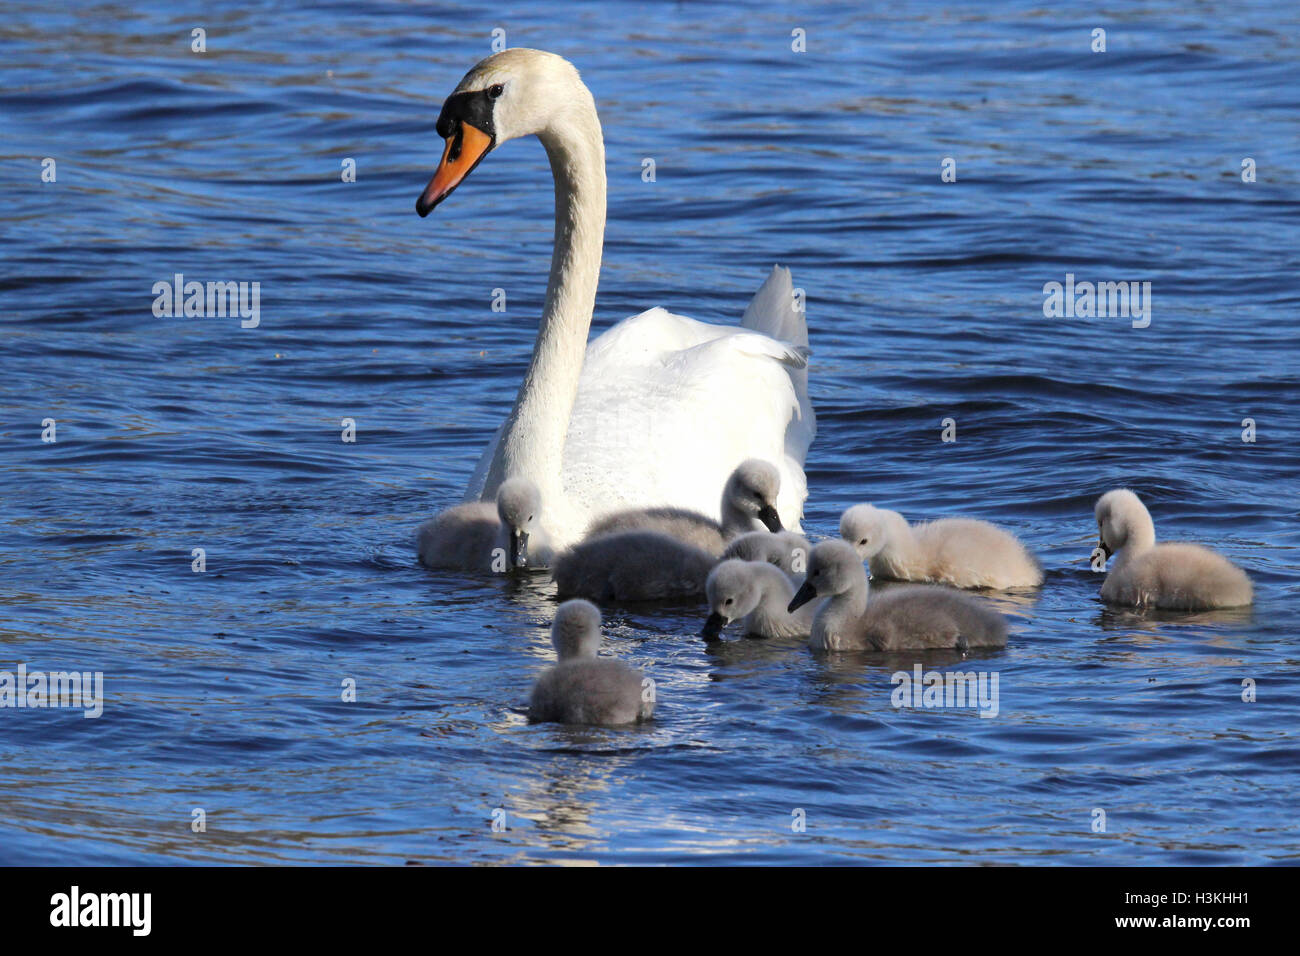 A mute swan (Cygnus olor) swimming on a lake with a family of cygnets Stock Photo